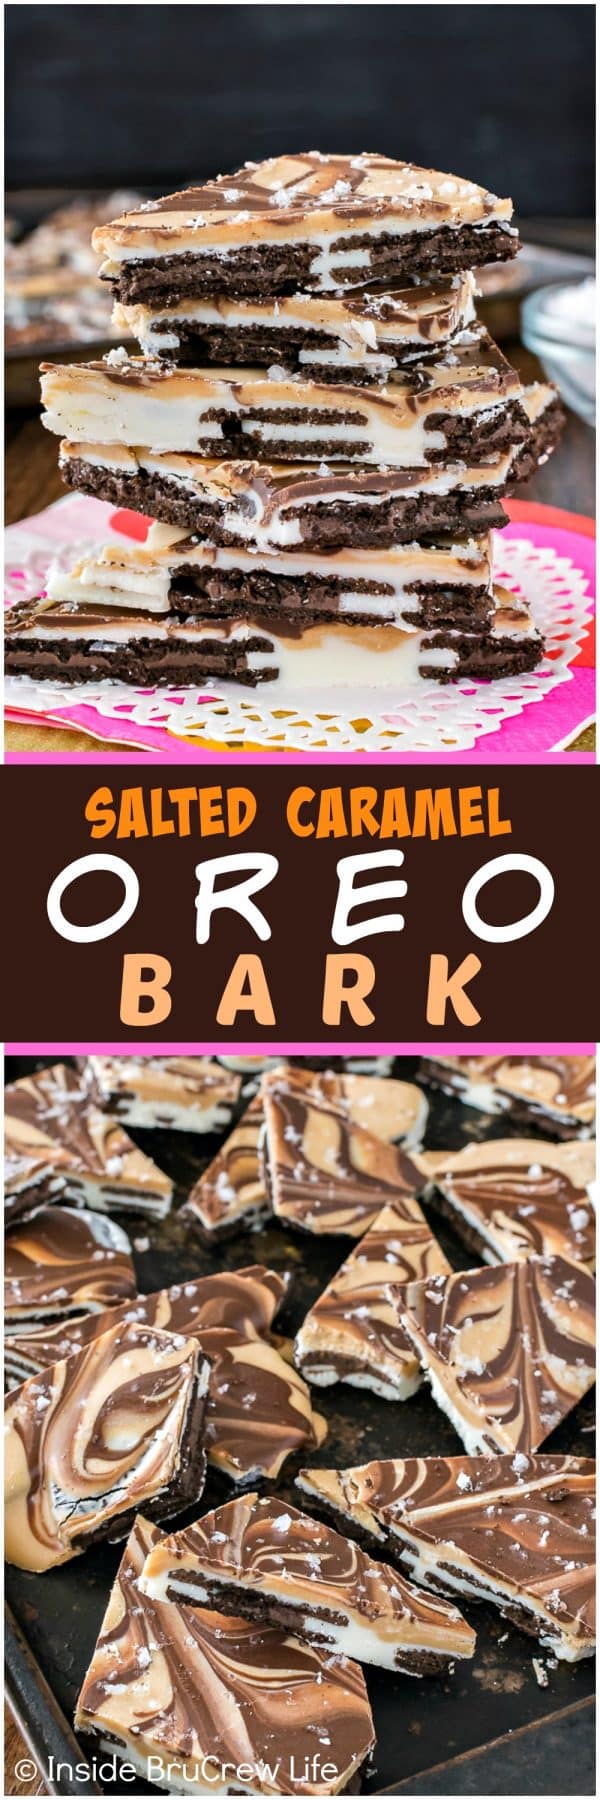 Salted Caramel Oreo Bark - swirls of chocolate and caramel on top of cookies makes this no bake candy disappear in a hurry. Easy recipe when you need a sweet treat in a hurry!